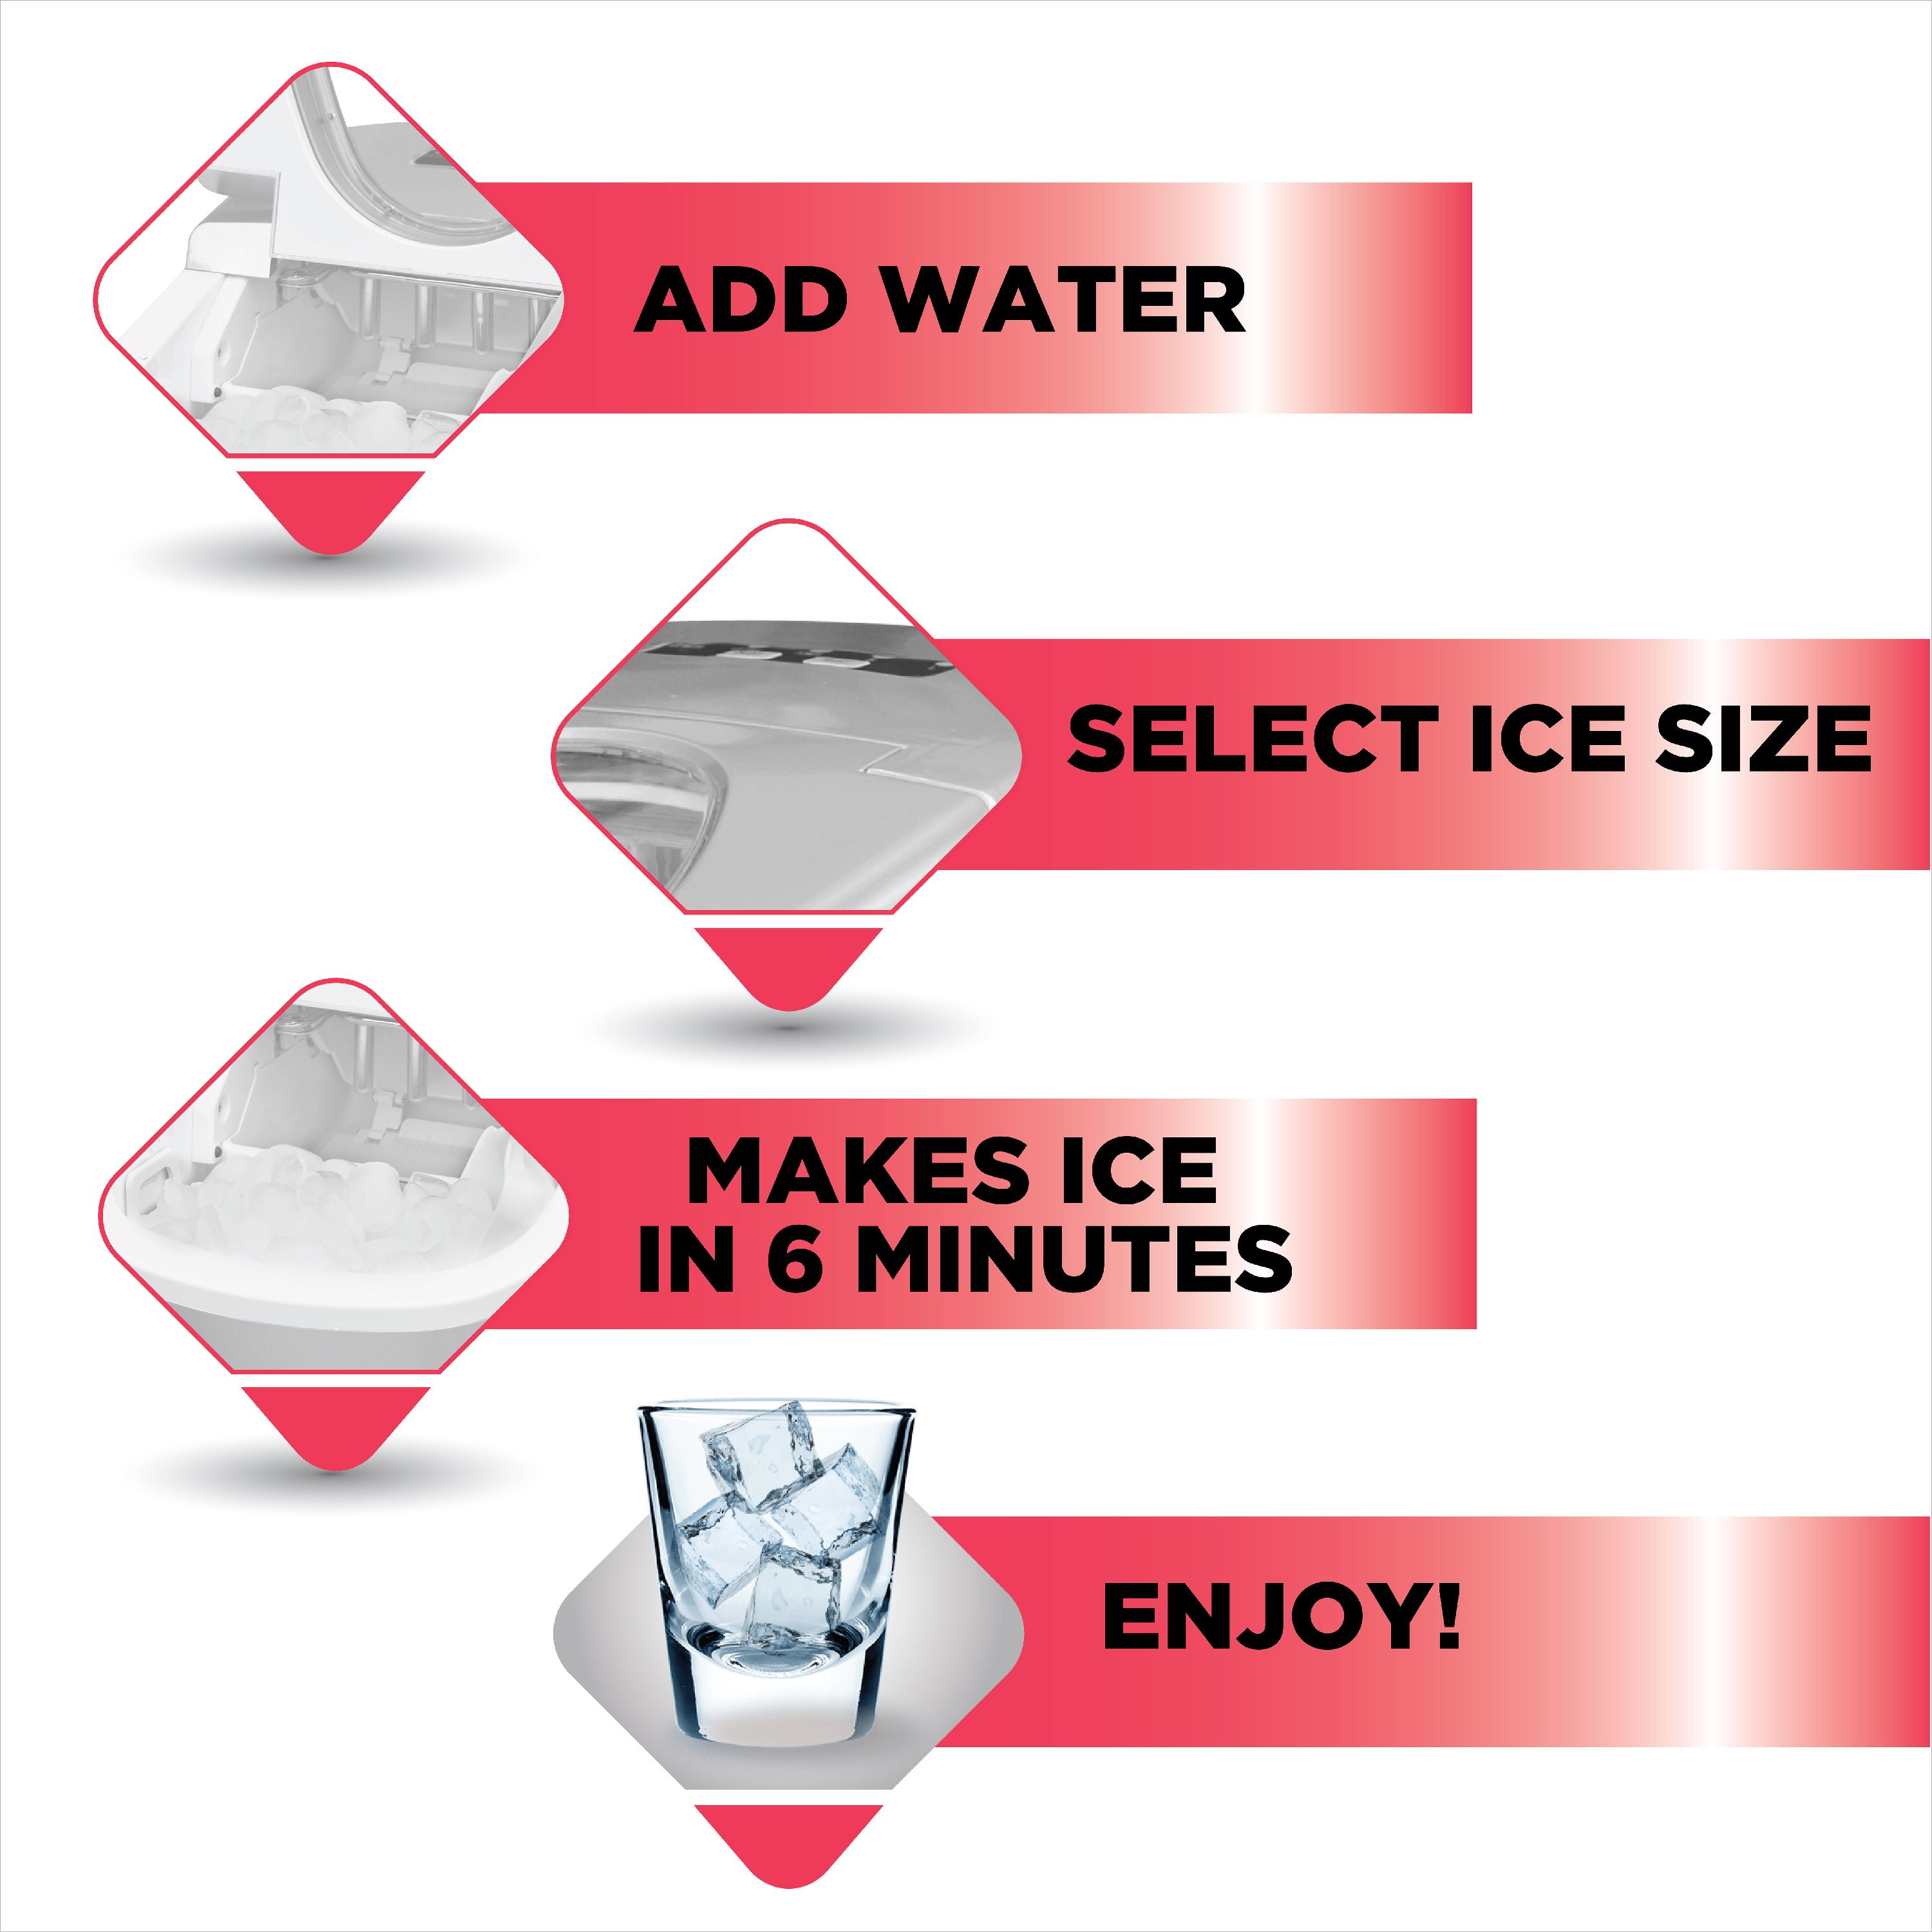 Silver Compact Ice Maker by FRIGIDAIRE at Fleet Farm